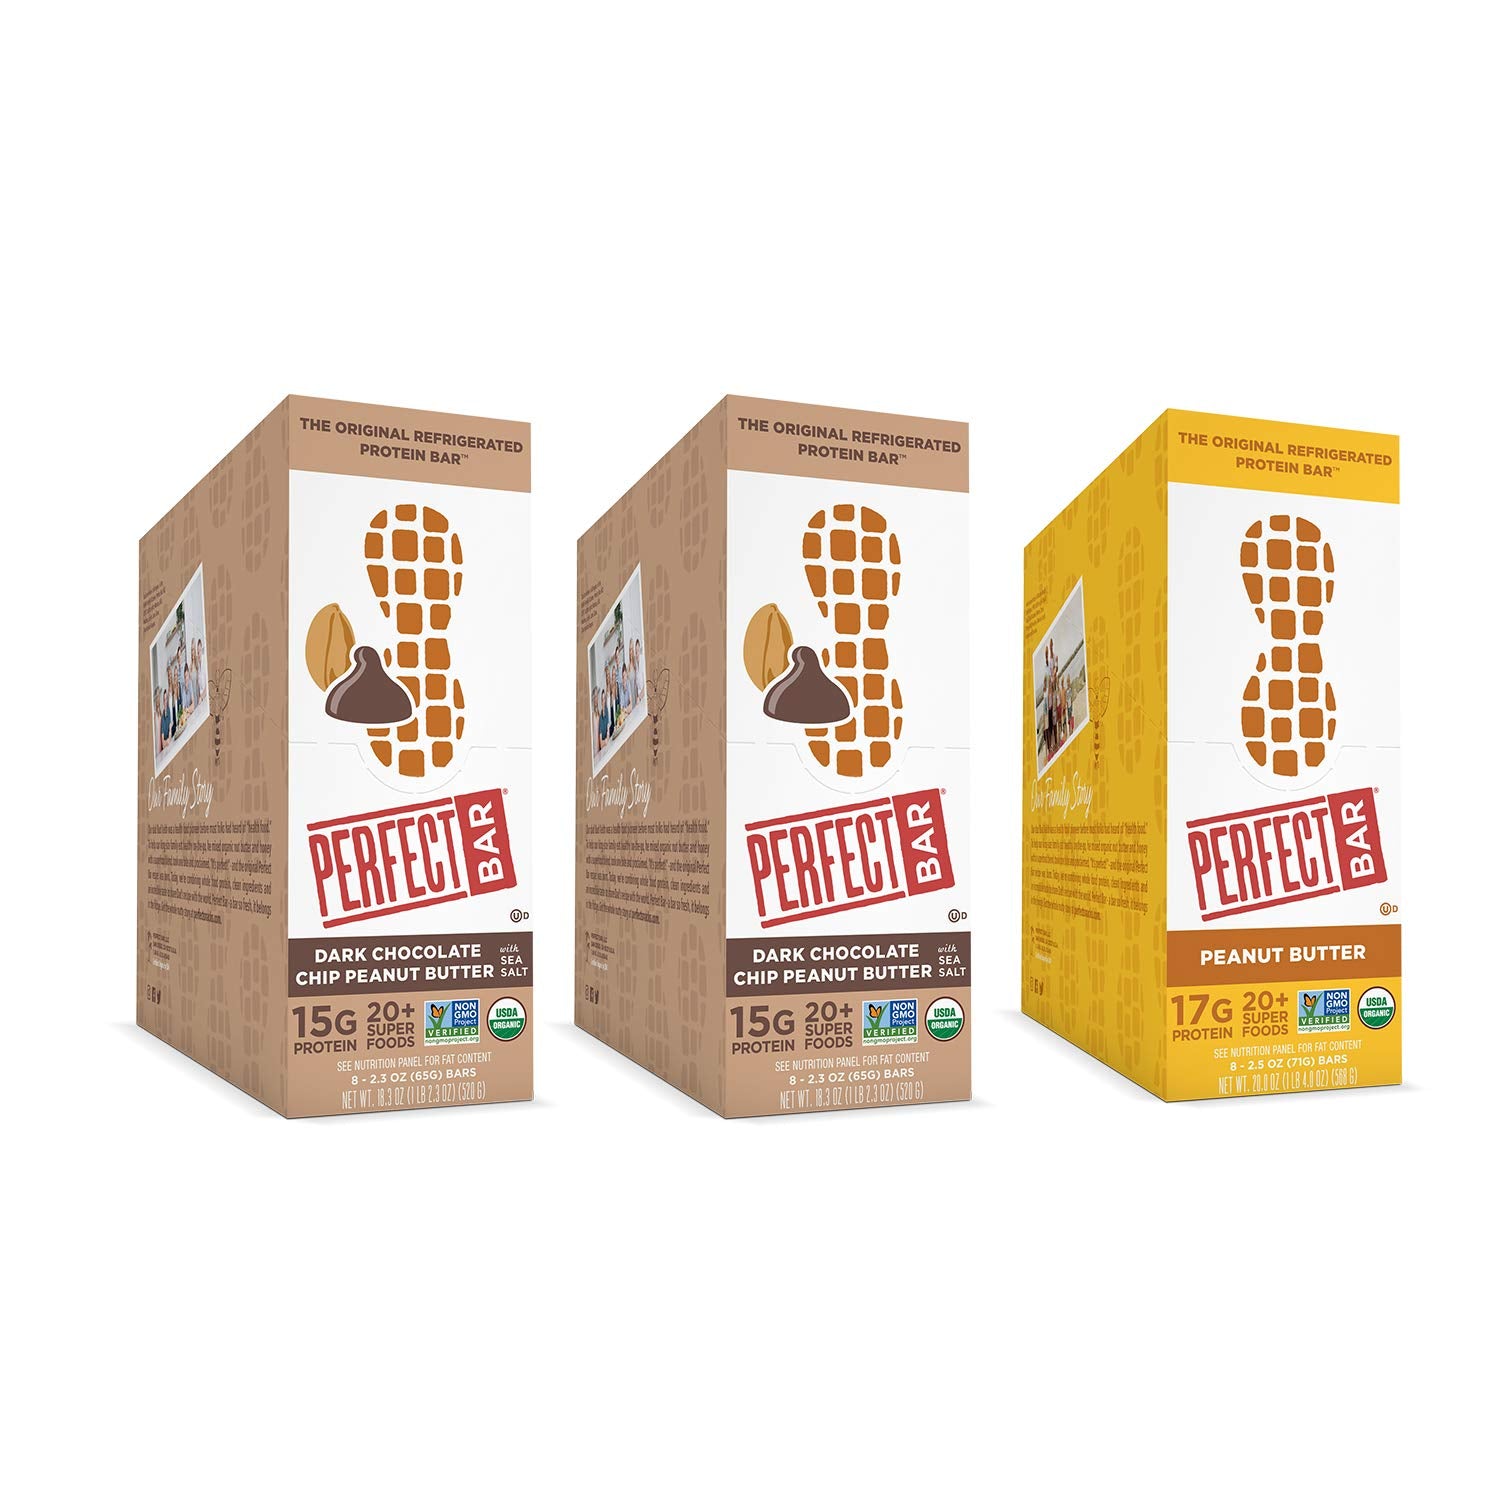 Perfect Bar Original Refrigerated Protein Bar, Dark Chocolate Chip Peanut Butter Variety Bundle, 2.3-2.5 Ounce Bar, 8 Count